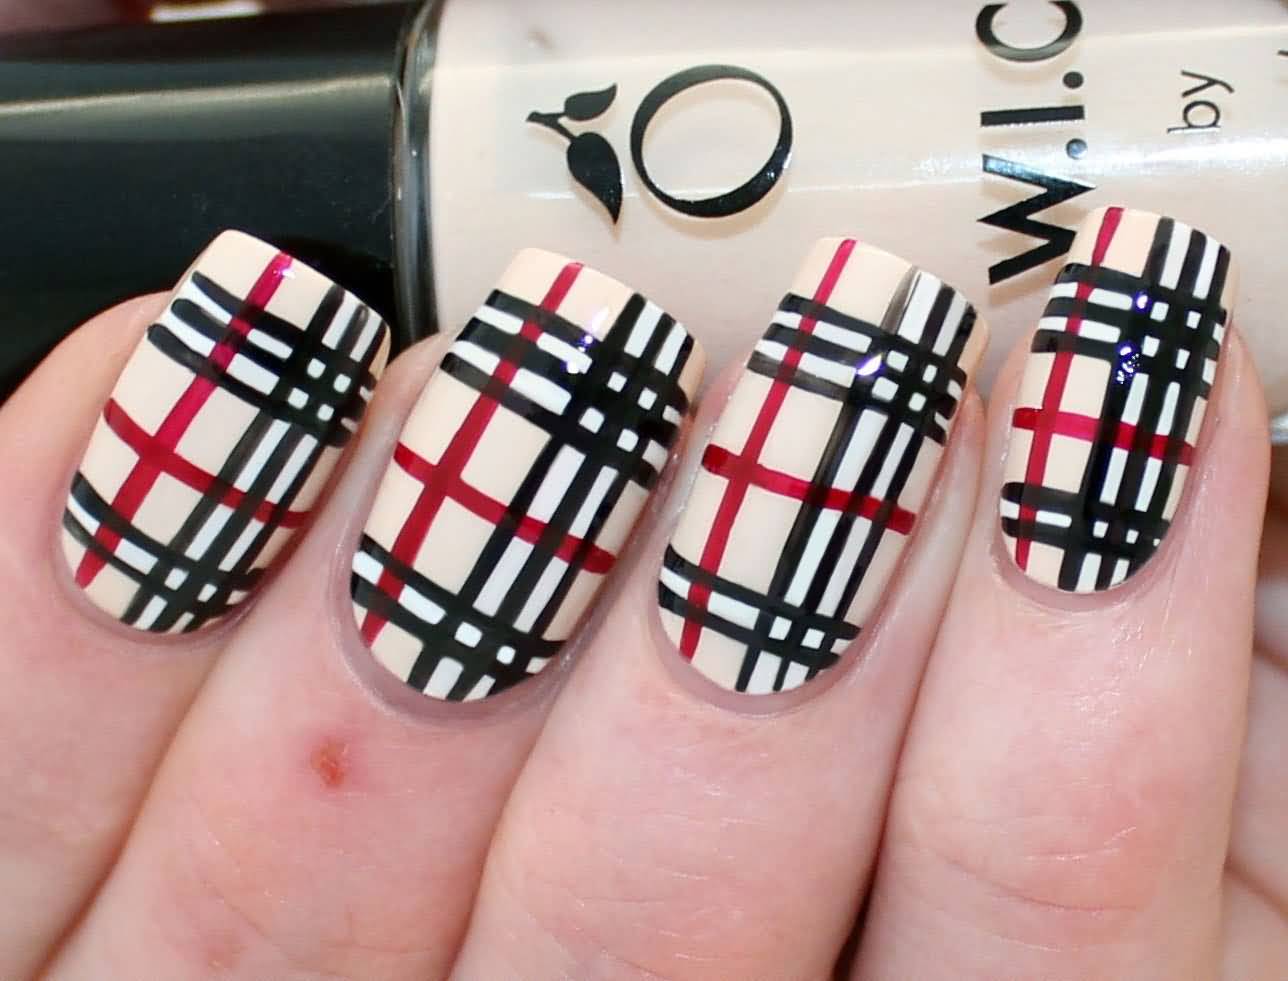 4. Burberry Plaid Nails for a Classic Summer Look - wide 10